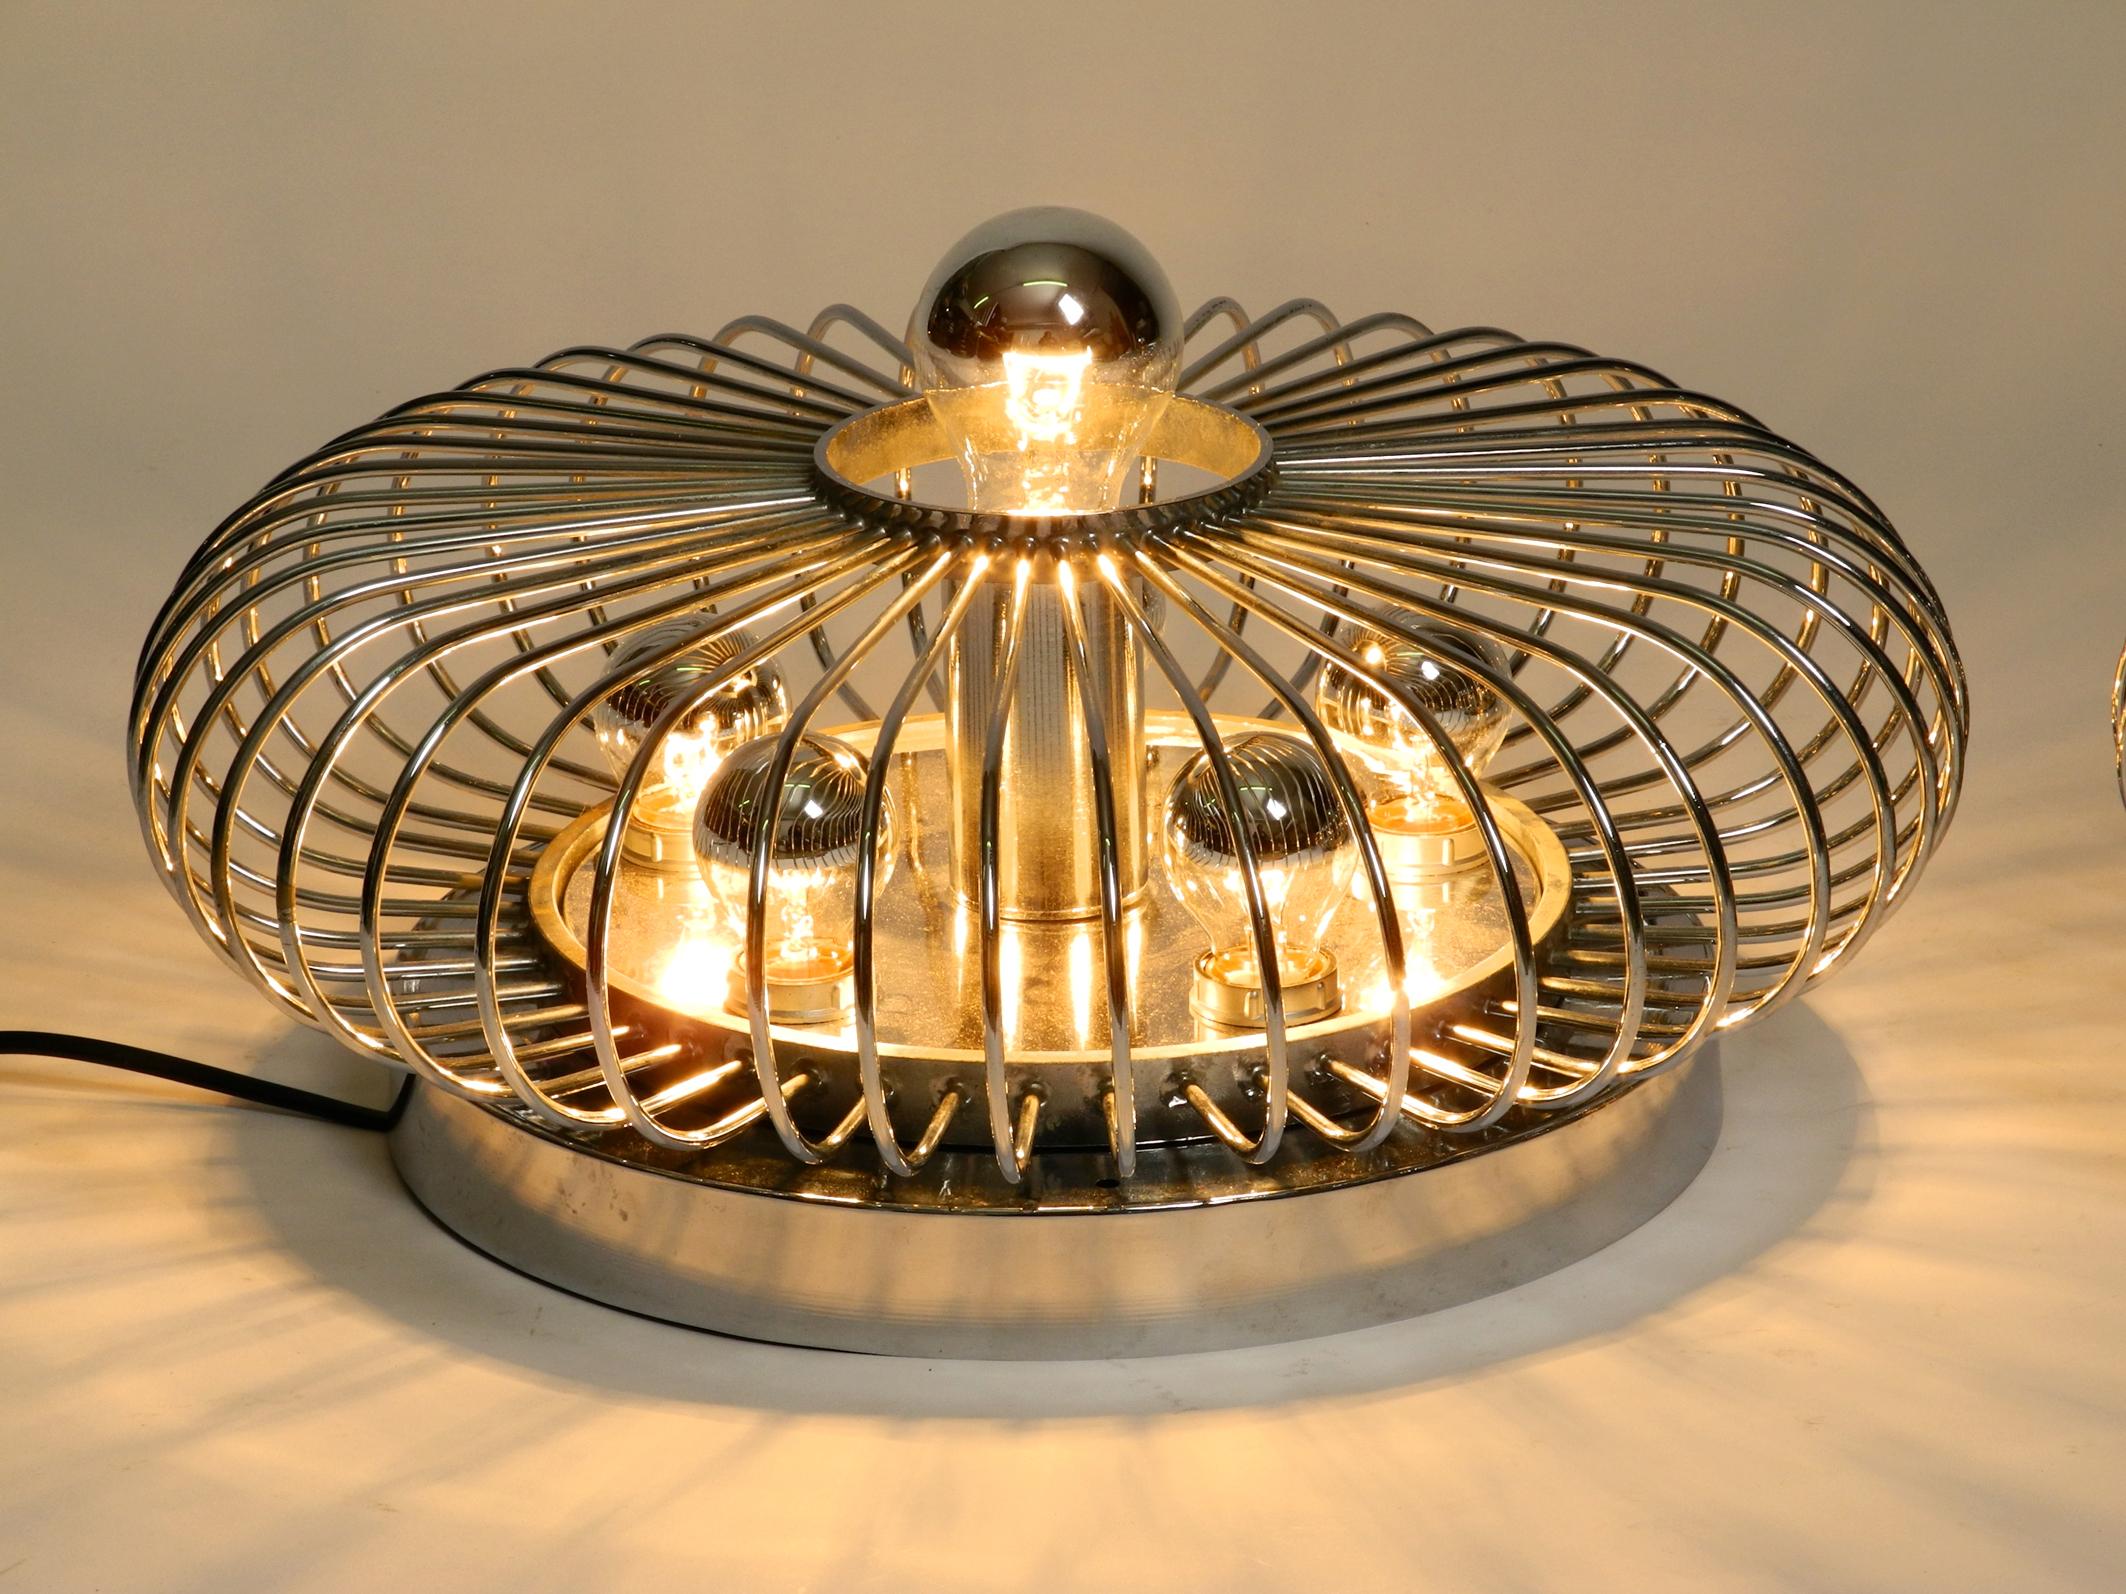 Pair of Italian 1980's Large Chromed Metal Ceiling or Wall Lamps Spiral Design 1